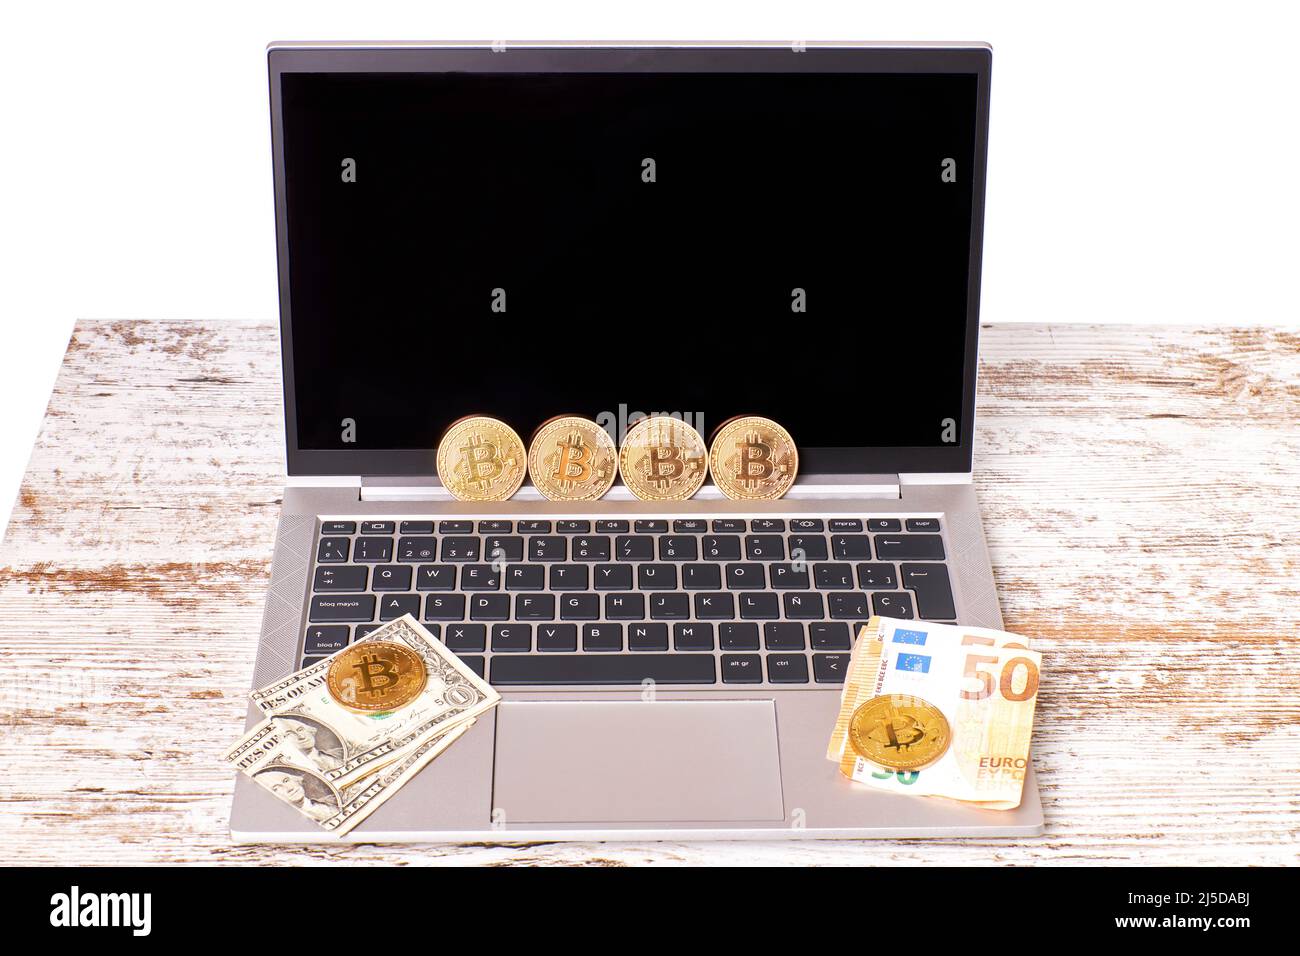 Bitcoin, Euro and dollar bills on a laptop on an office desk. Payment with cryptocurrencies, using virtual currency. Internet economy concept Stock Photo